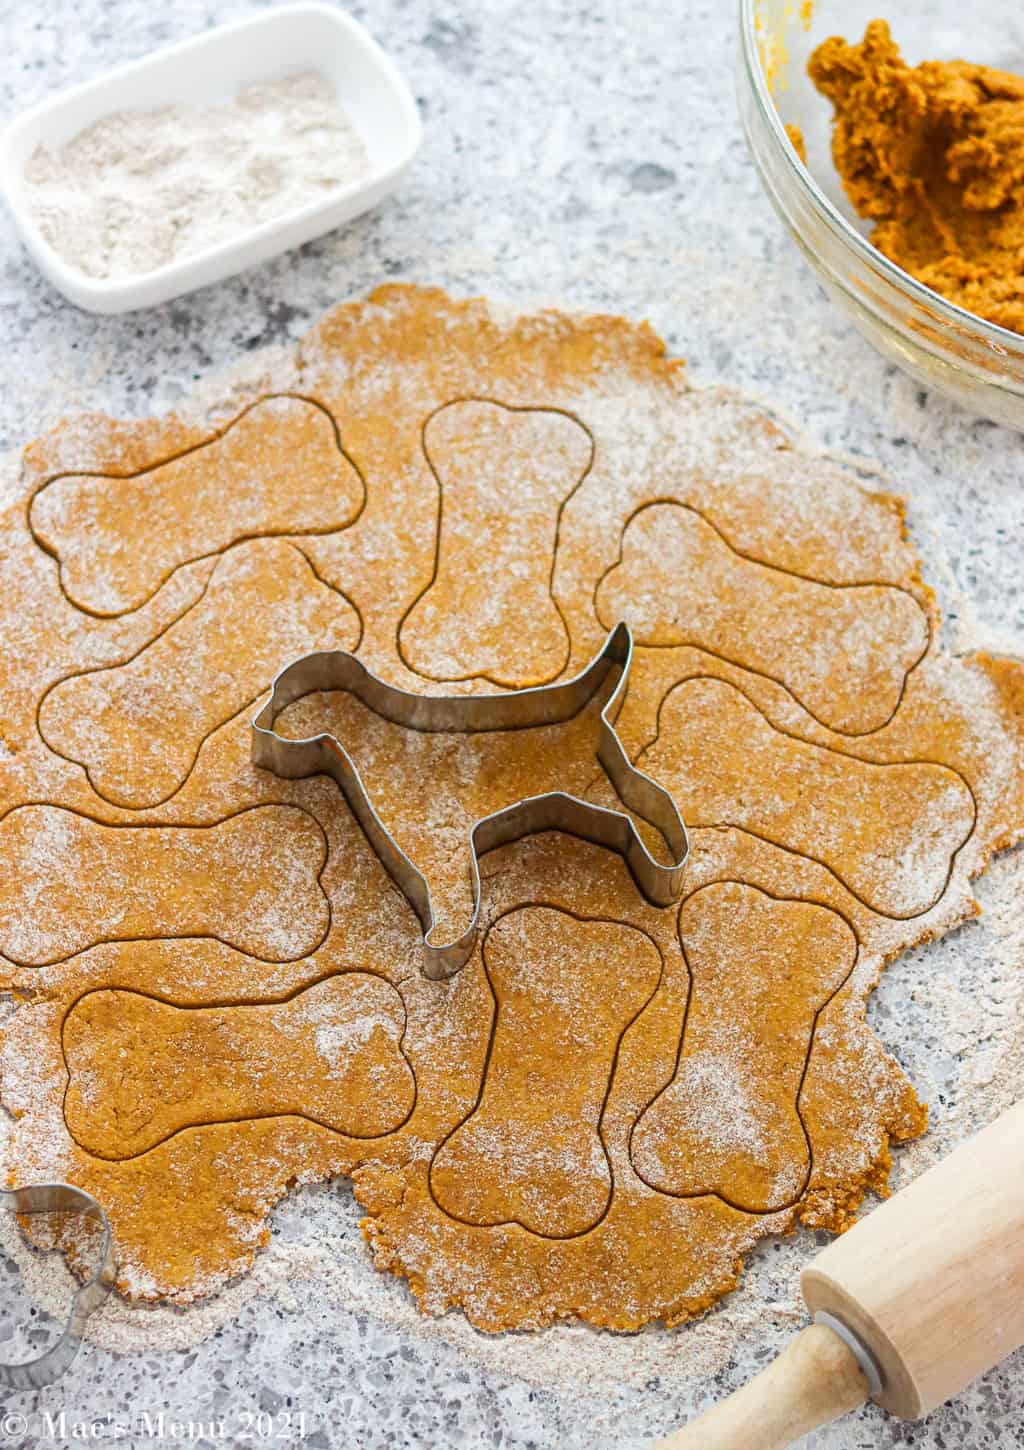 An overhead shot of dog treat dough rolled out with cookie cutter shapes cut out and a dog shape cutter in the center of the dough